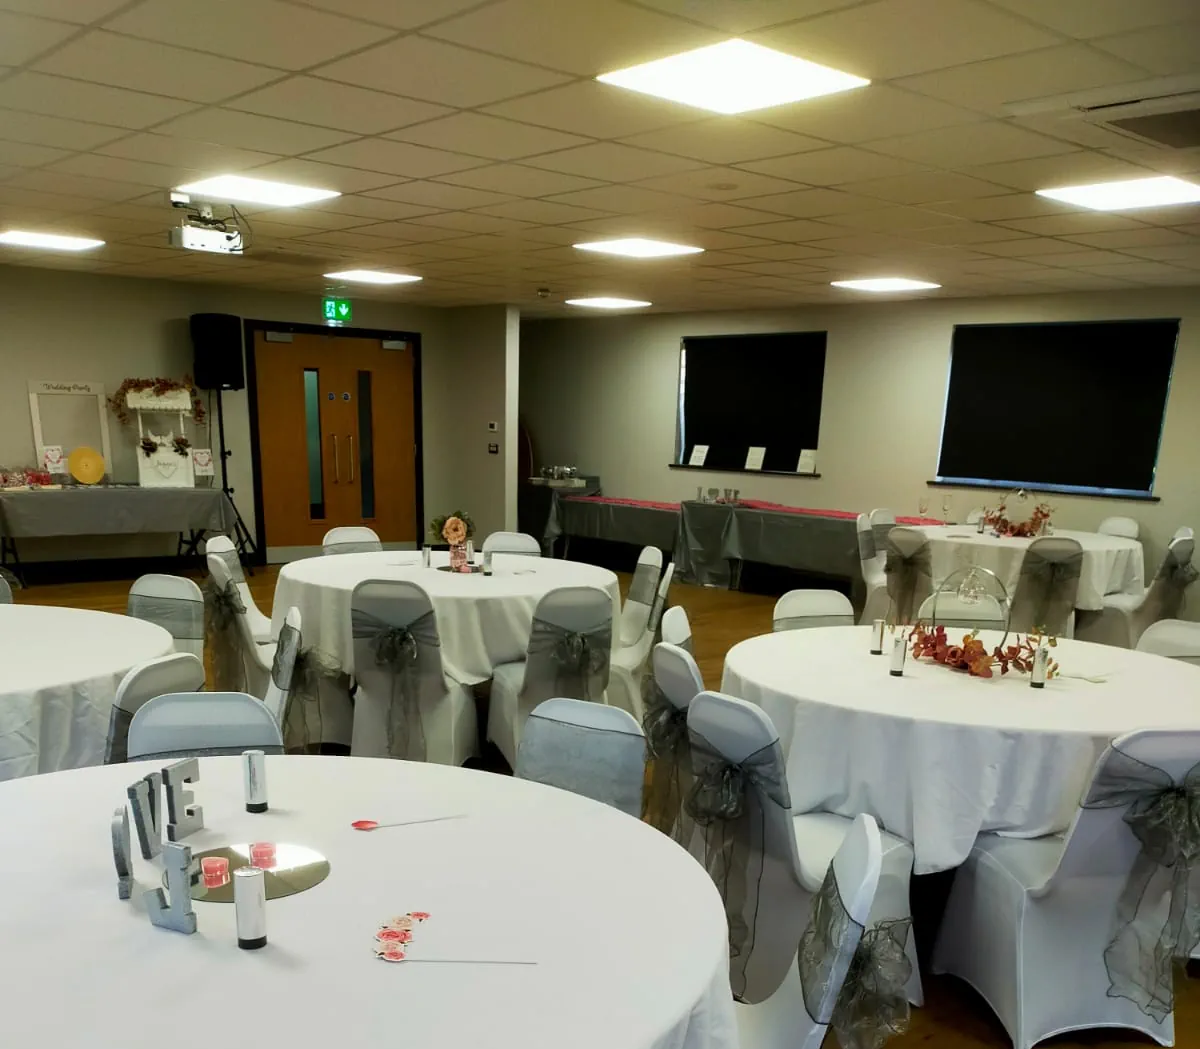 Bradfords Horsfall Function Room Decorated As A Wedding Venue